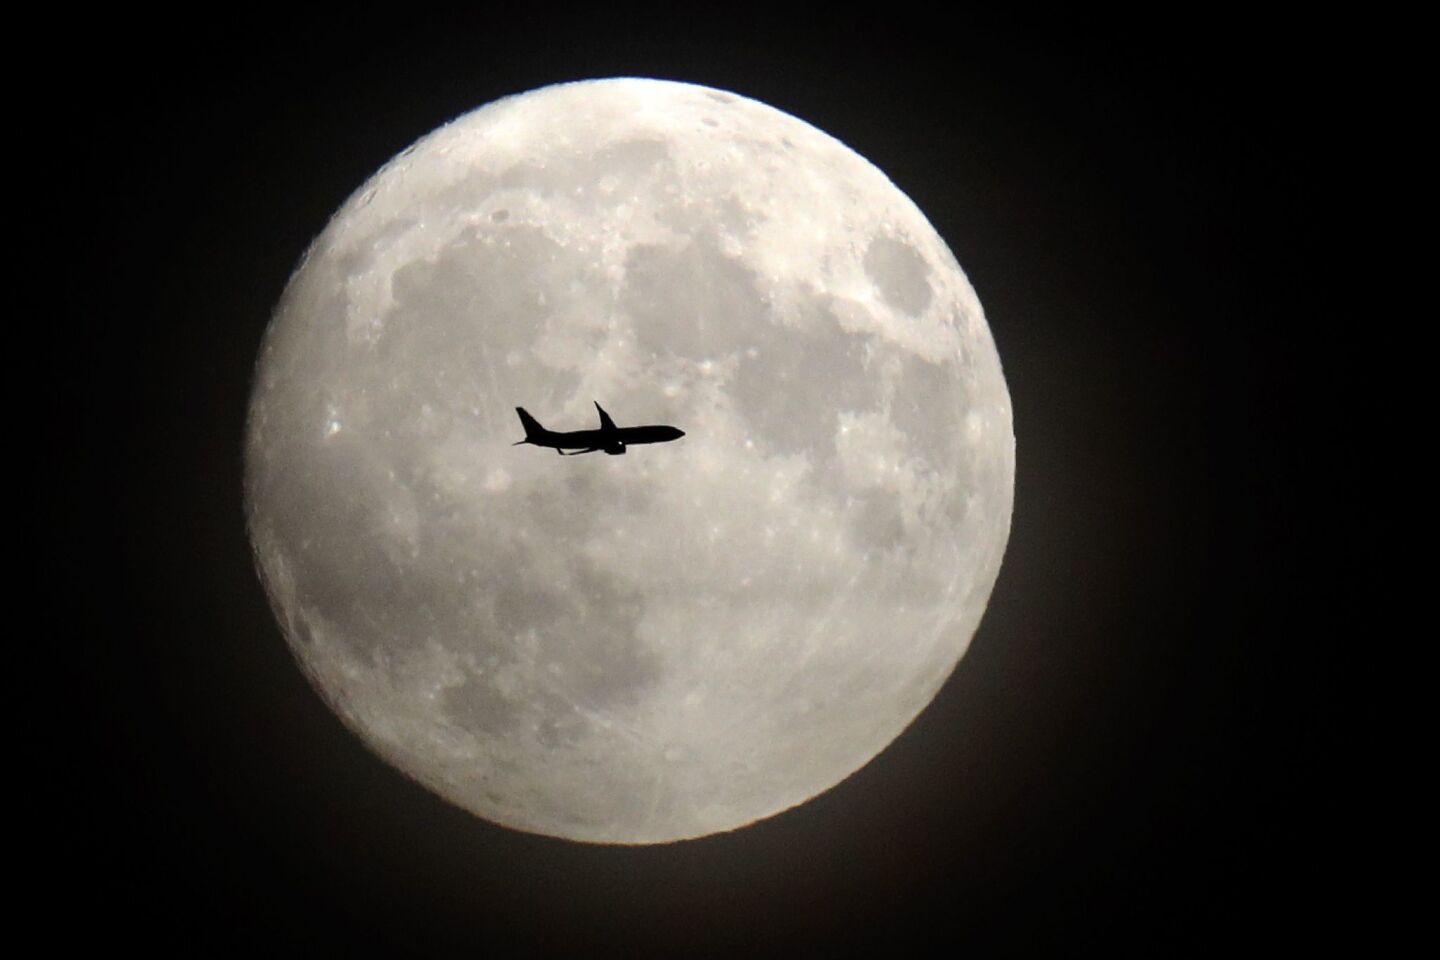 A commerical jet flies in front of the moon on its approach to Heathrow airport in London.